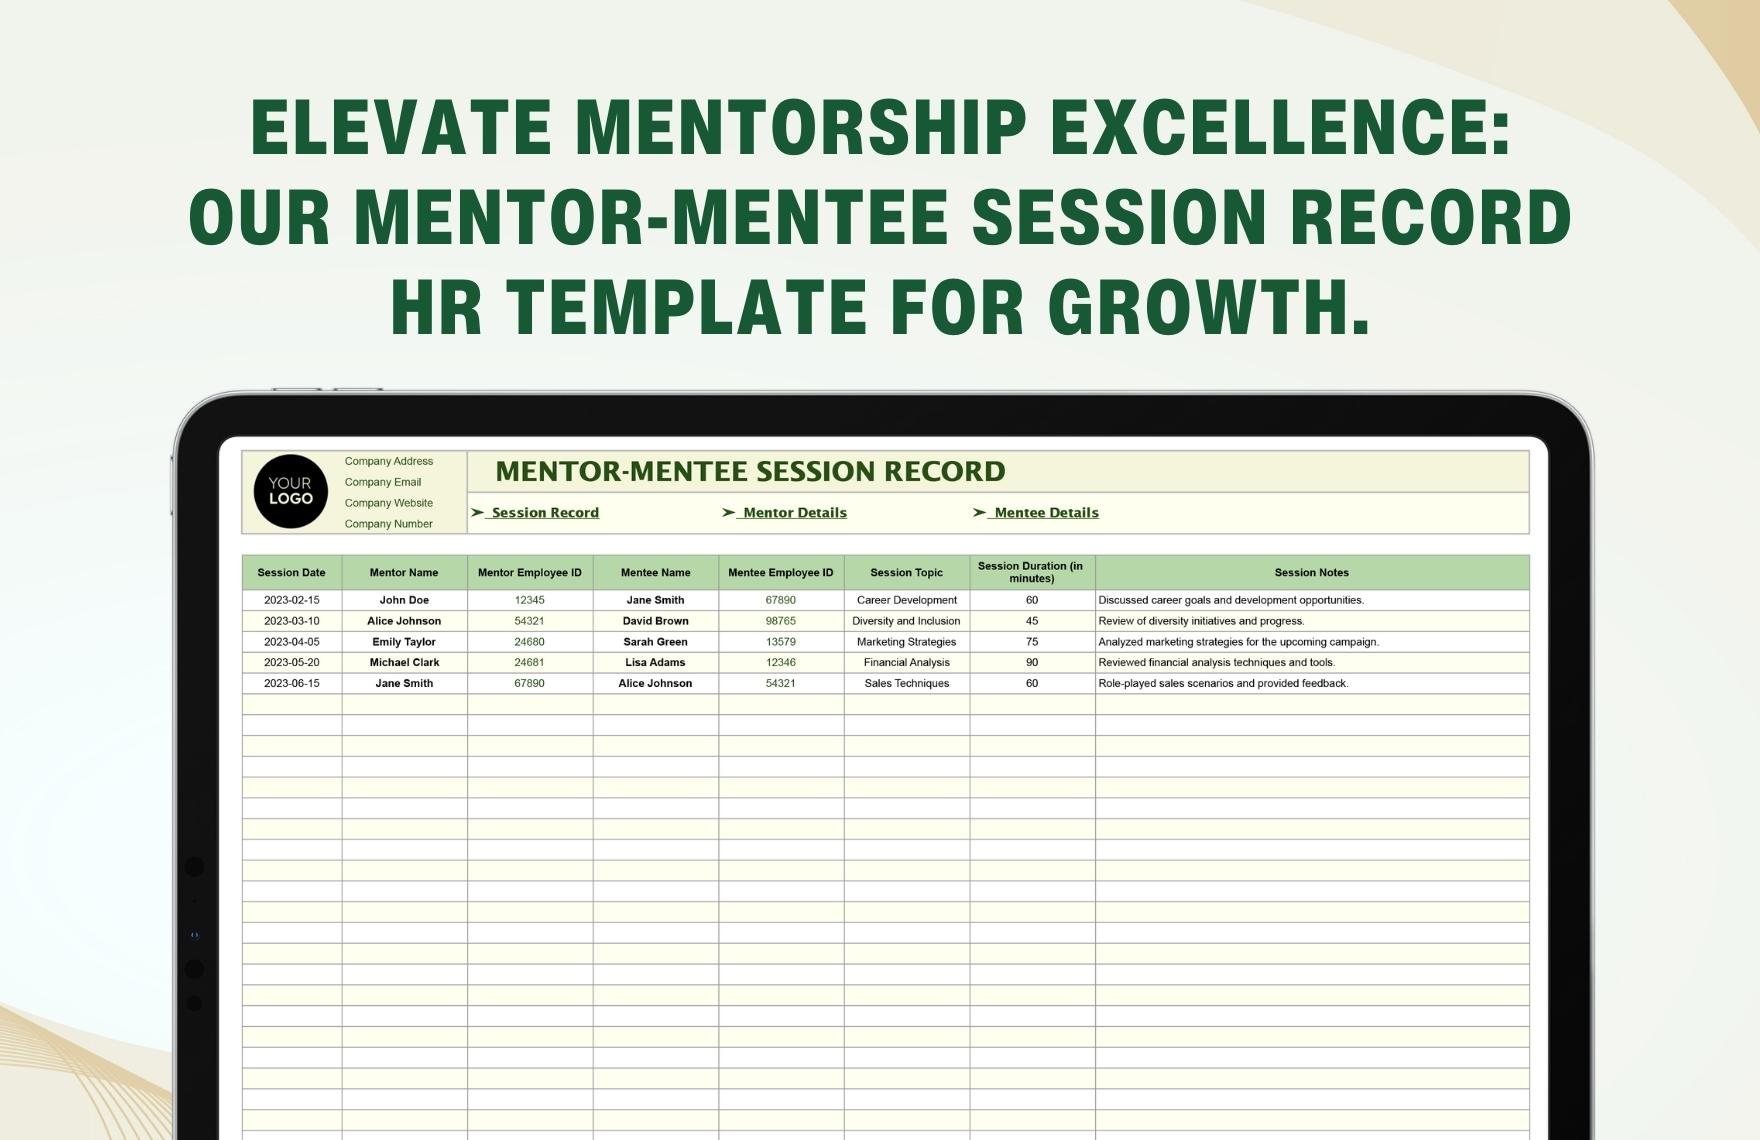 Mentor-Mentee Session Record HR Template